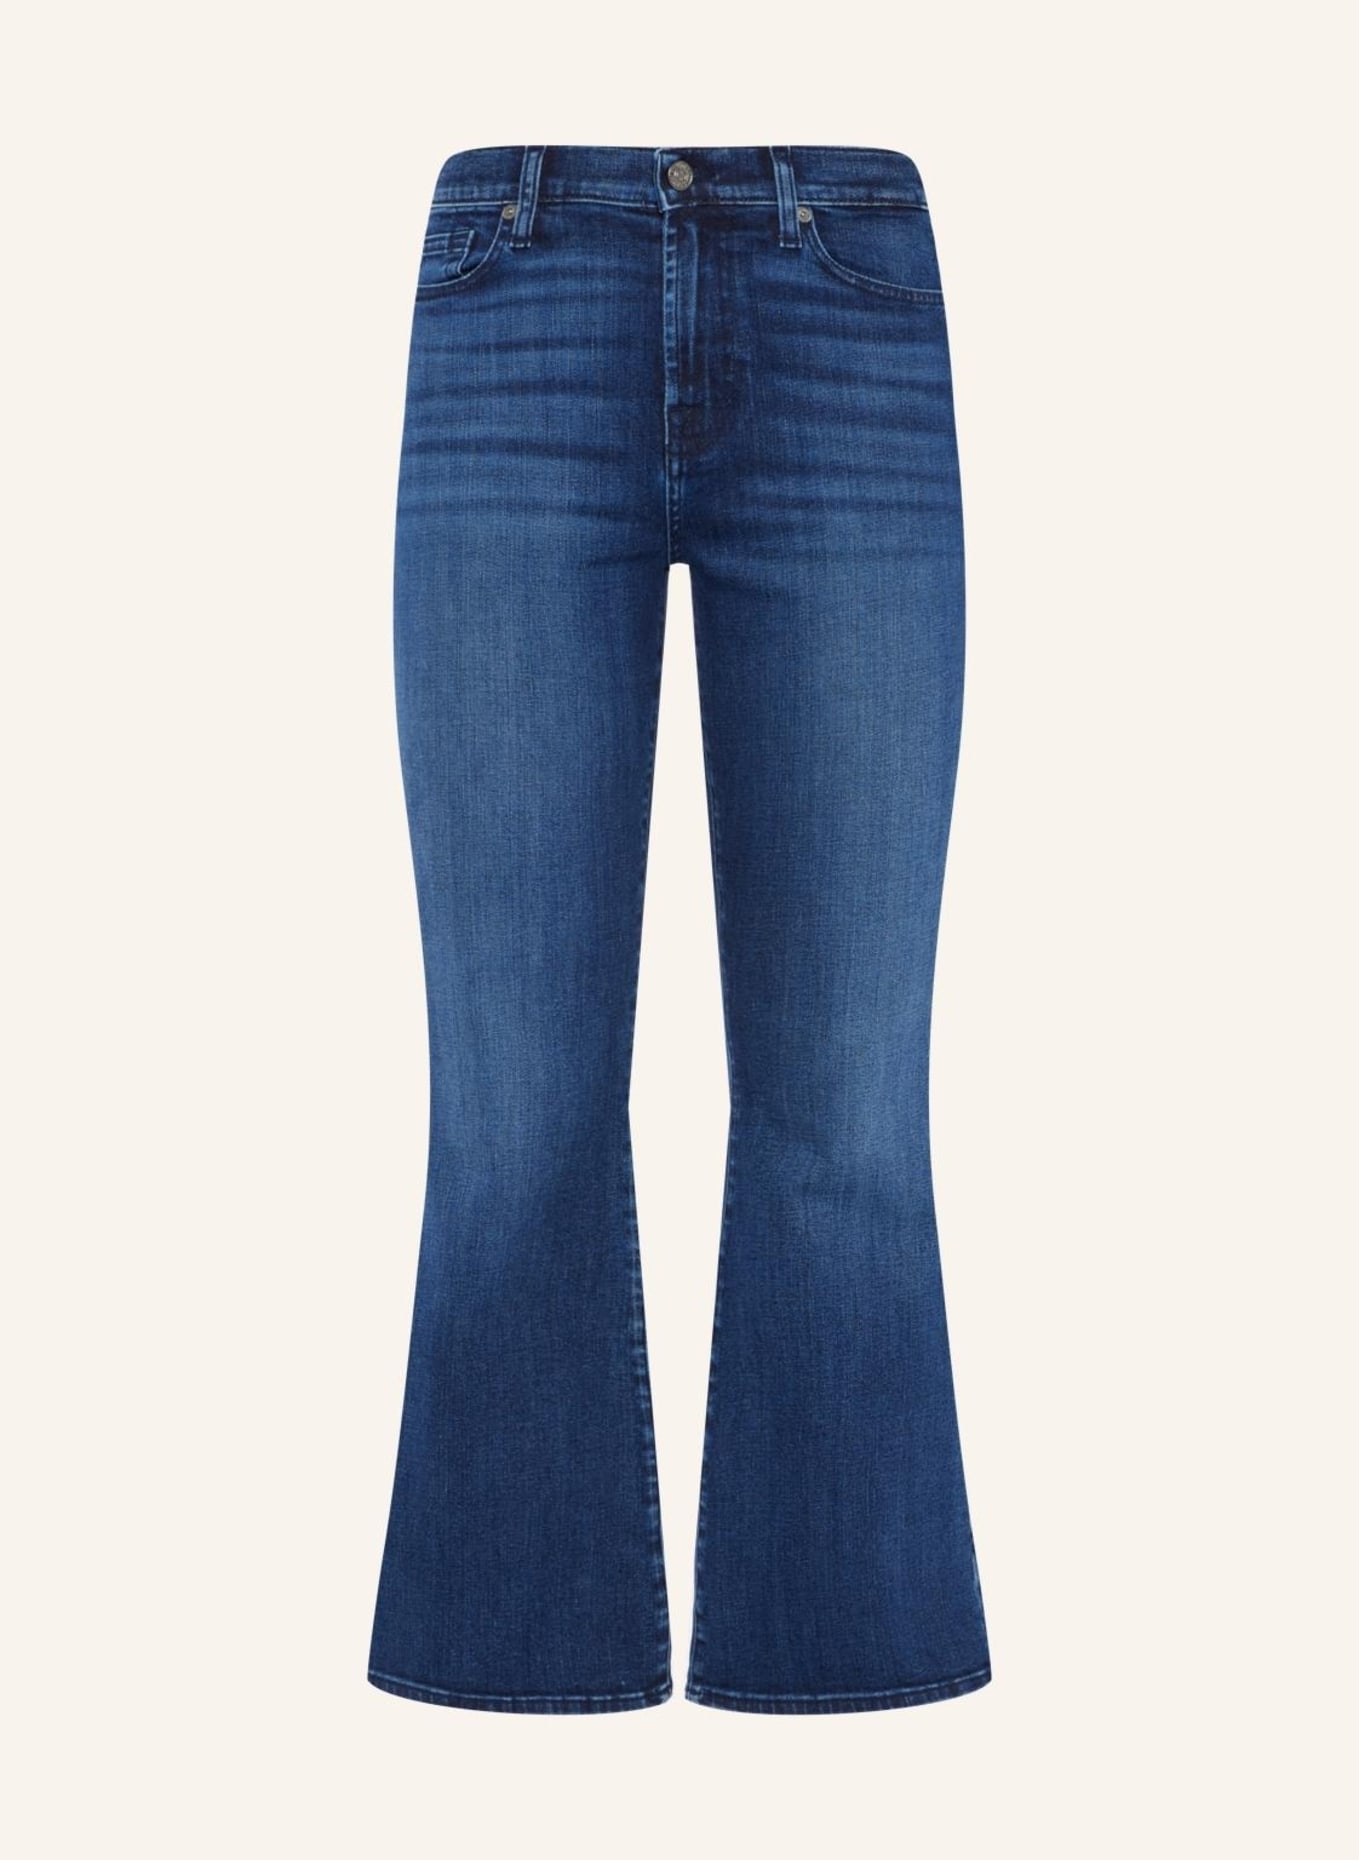 7 for all mankind Jeans BETTY BOOT Bootcut fit, Farbe: BLAU (Bild 1)